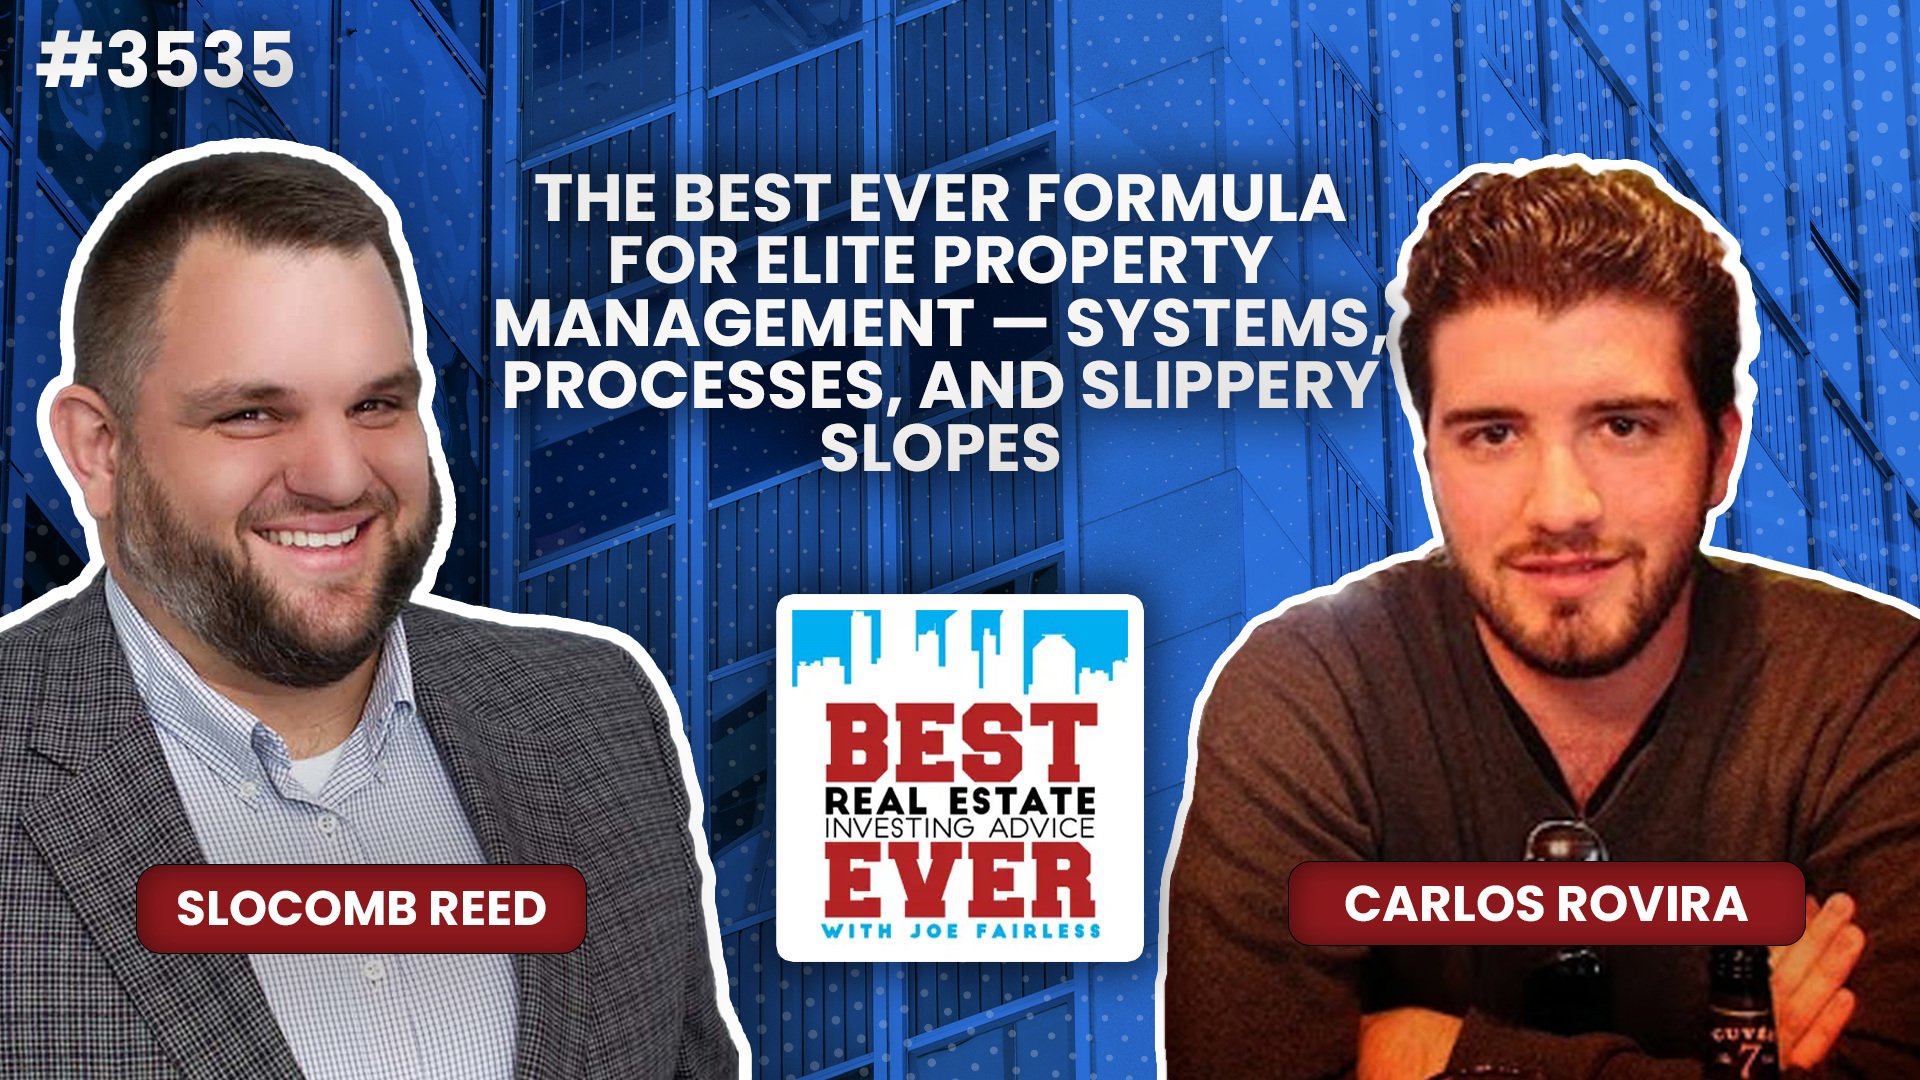 JF3535: The Best Ever Formula for Elite Property Management — Systems, Processes, and Slippery Slopes ft. Carlos Rovira